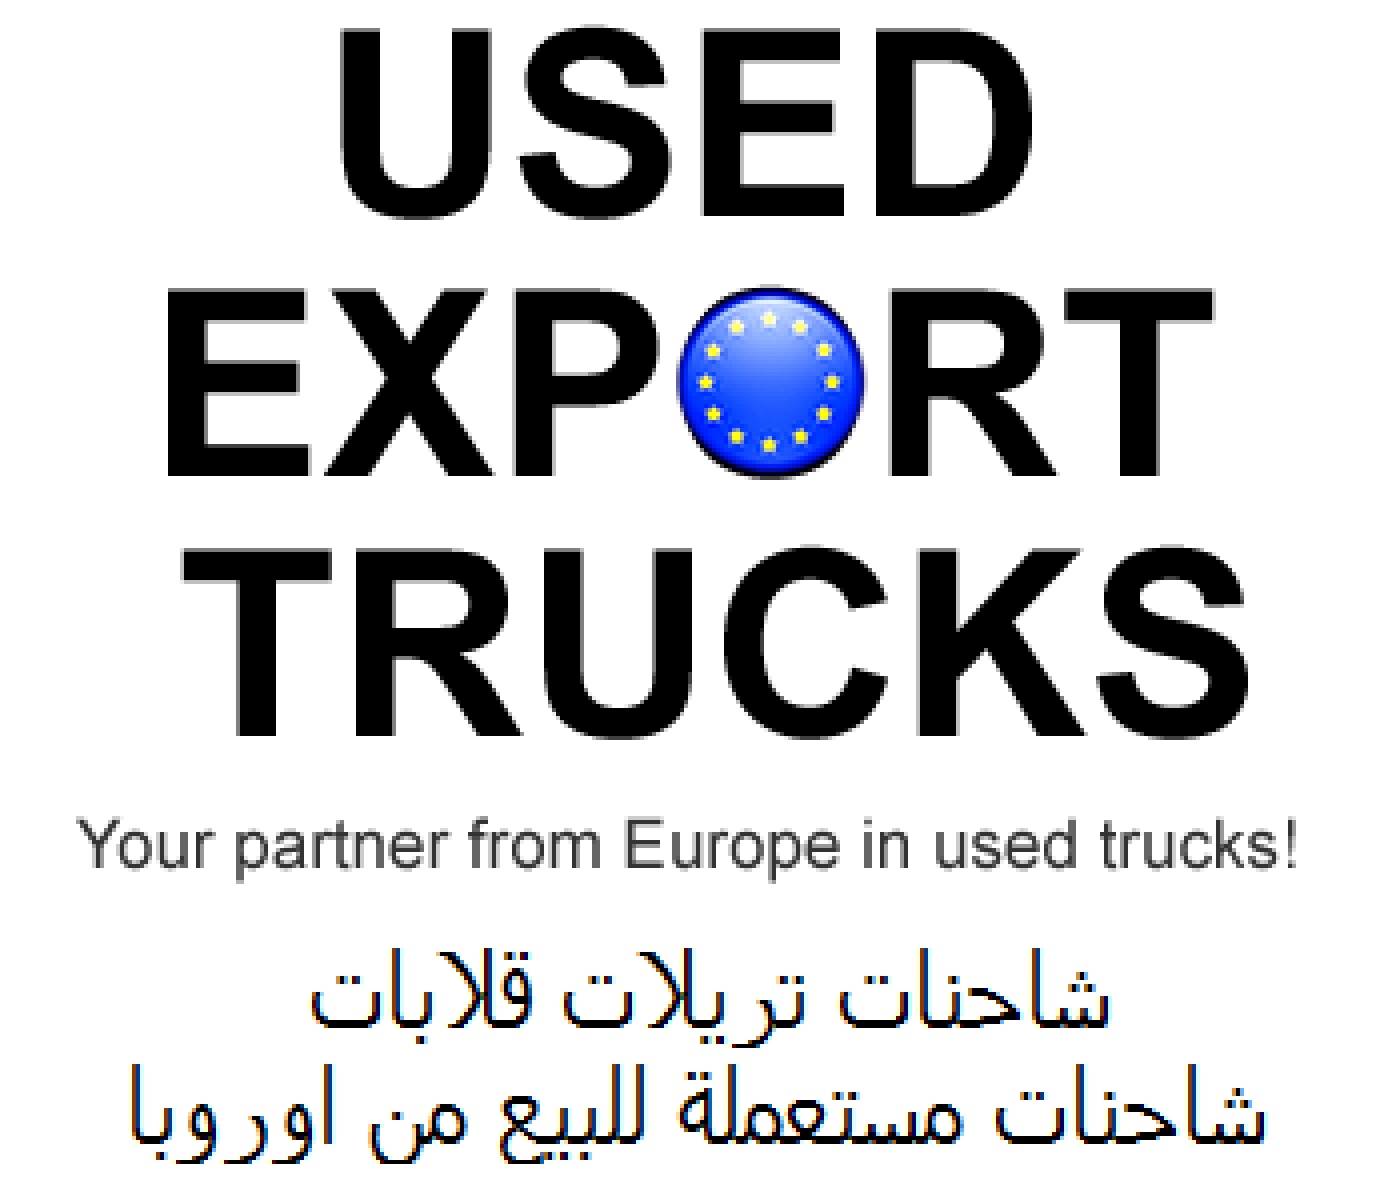 Your partner from Europe in used trucks